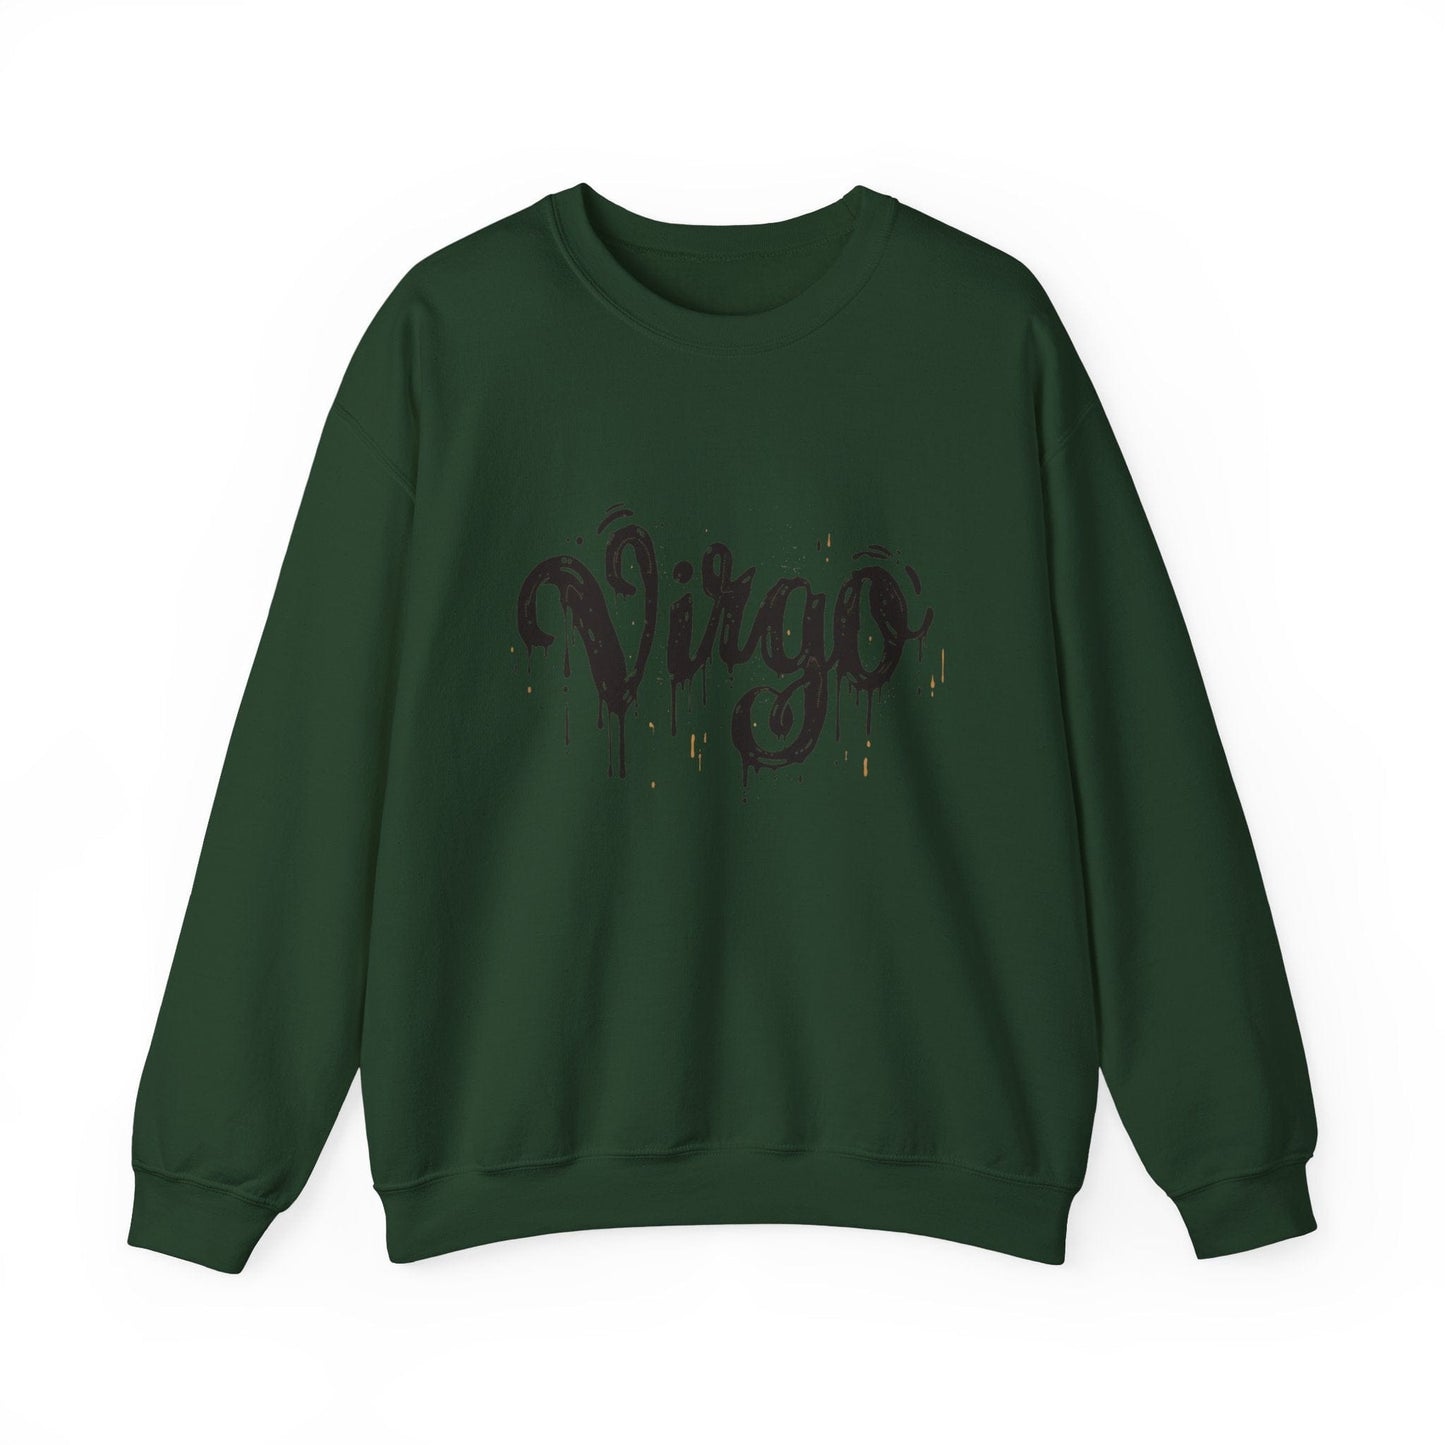 Sweatshirt S / Forest Green "Inkwell Virtue" Virgo Sweater: The Art of Perfection